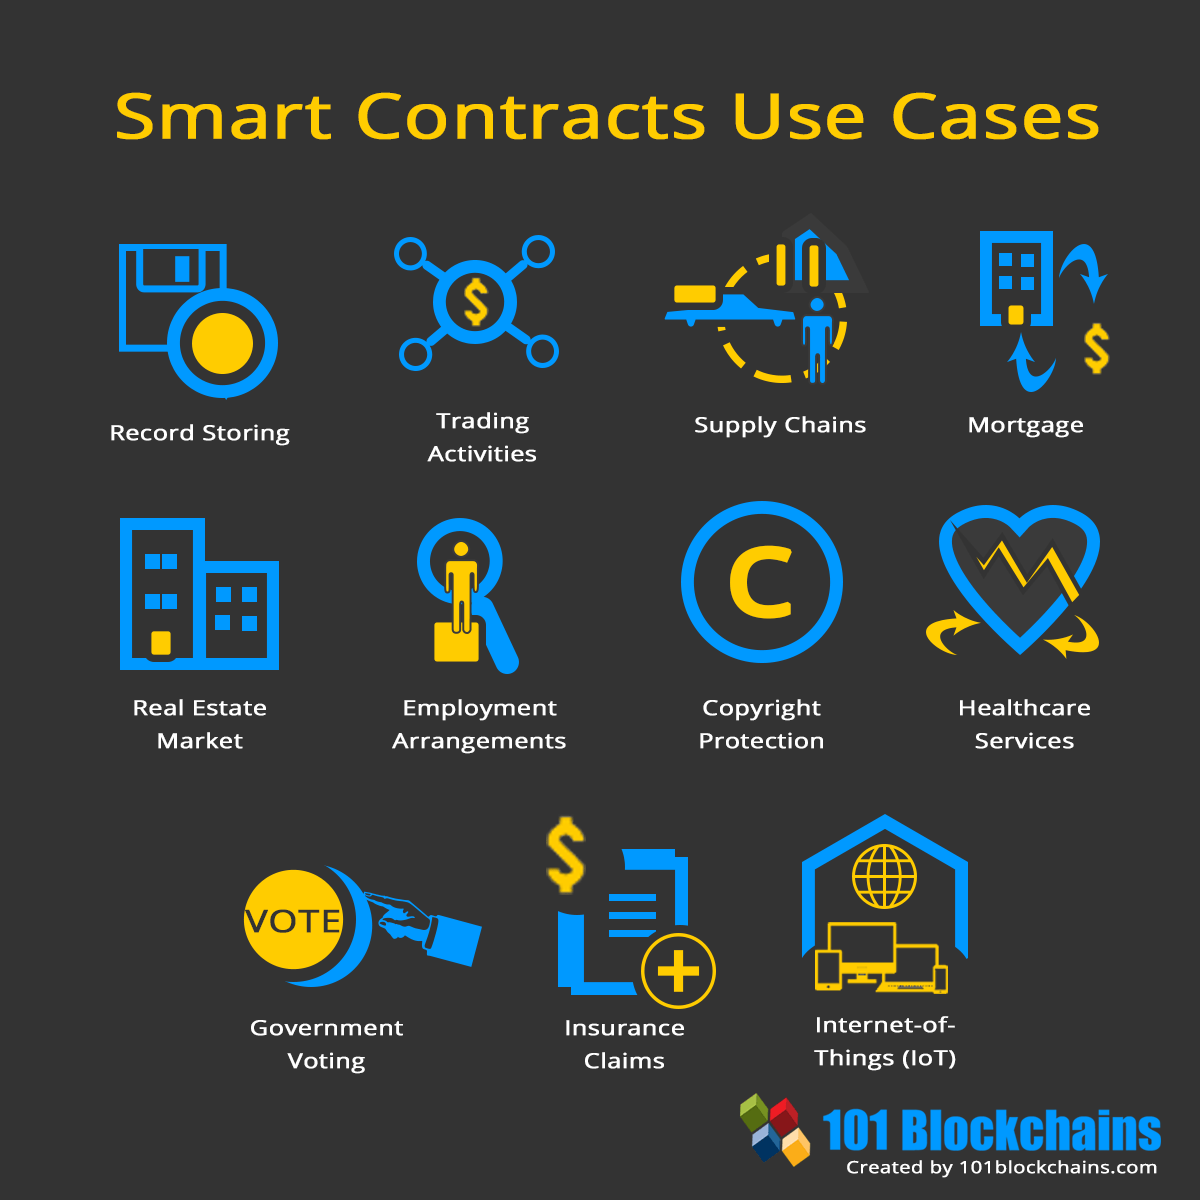 Smart Contracts Use Cases